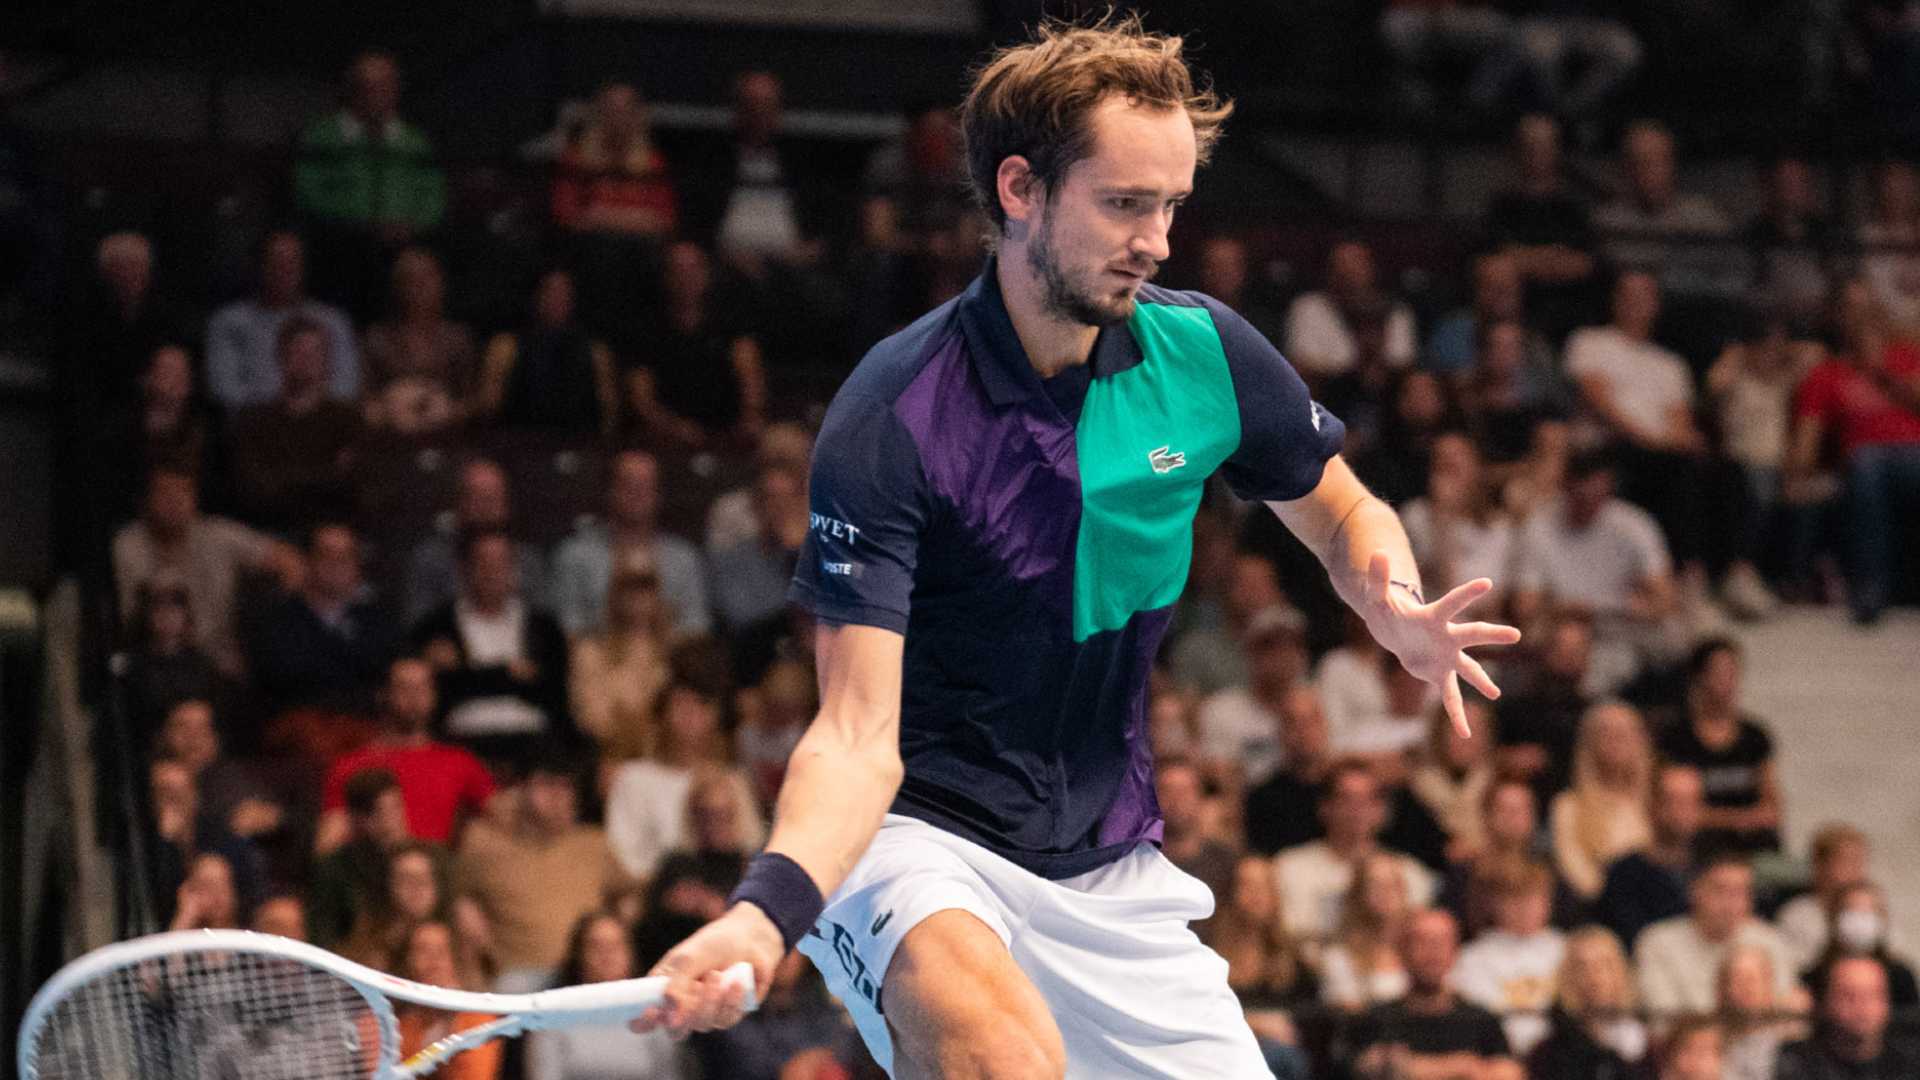 Vienna Open: Paul moves into second round - Tennis Majors